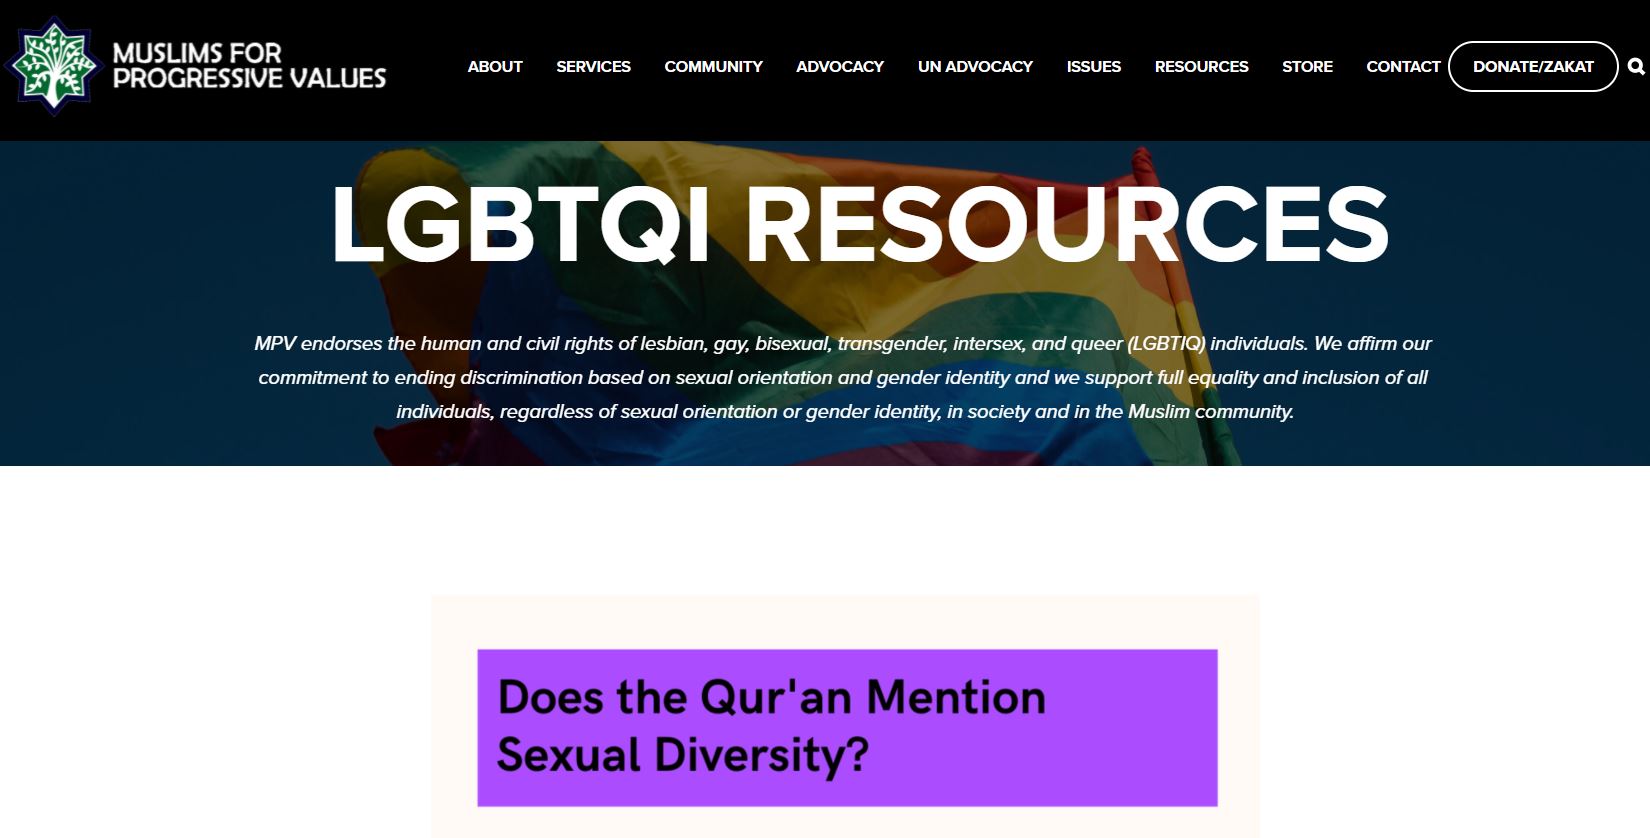 Muslims for Progressive Rights: LGBTQI Resources